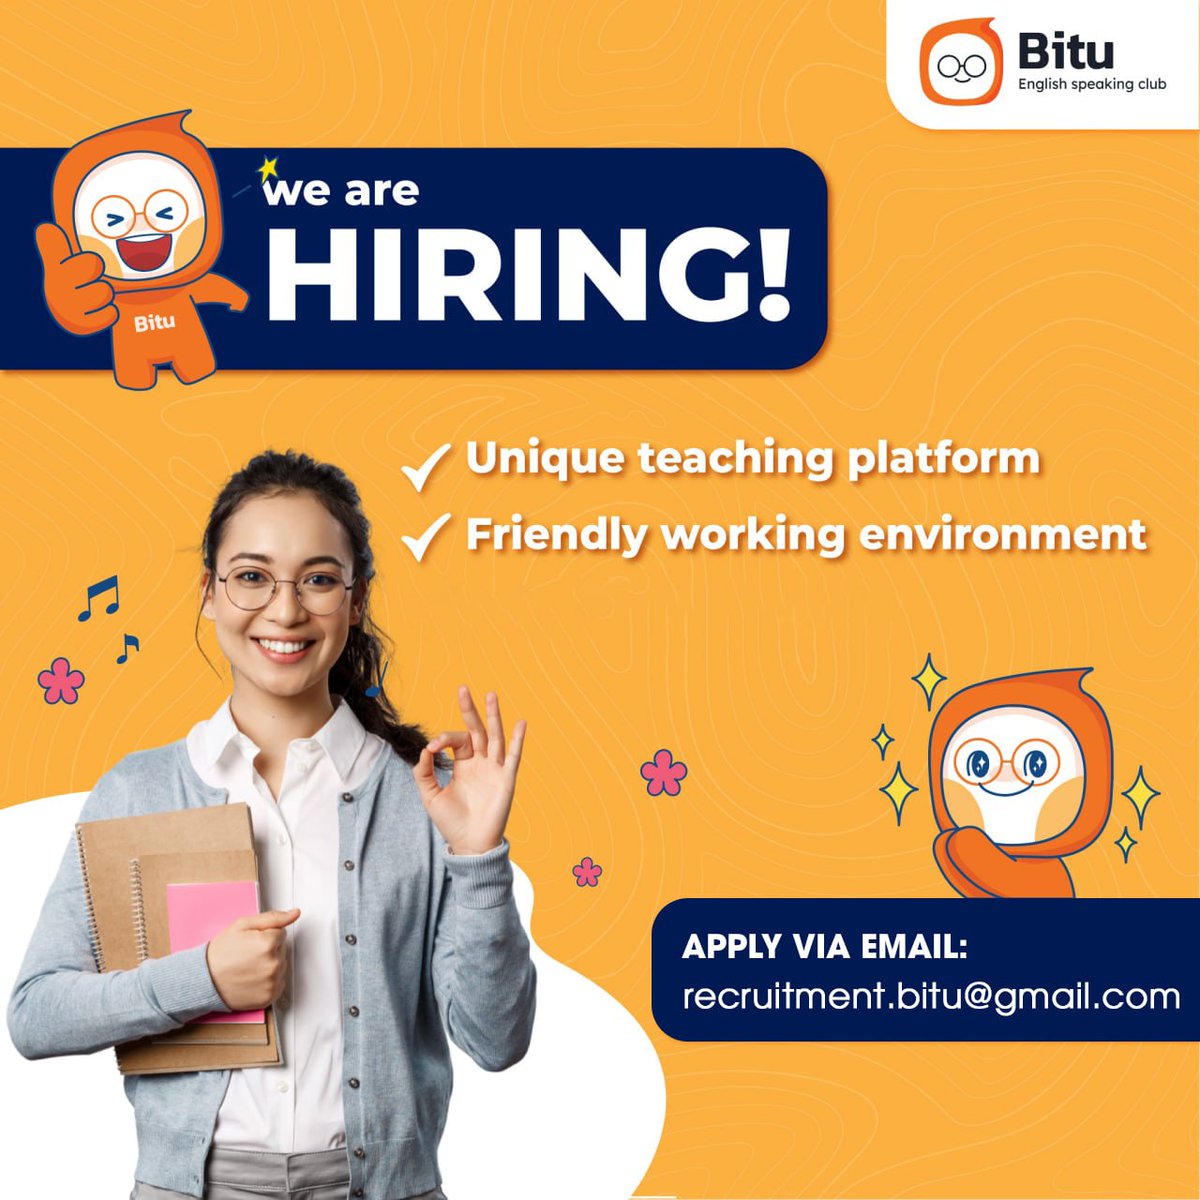 BITU-English Speaking App is currently hiring 02 teachers from the UK and Australia to teach full-time in the evening (Vietnam Time) online on the app. Details are as follows:
#onlineteacher #onlineteaching #remoteteaching  #remoteteacher #virtualteacher #onlineteacherrecruitment